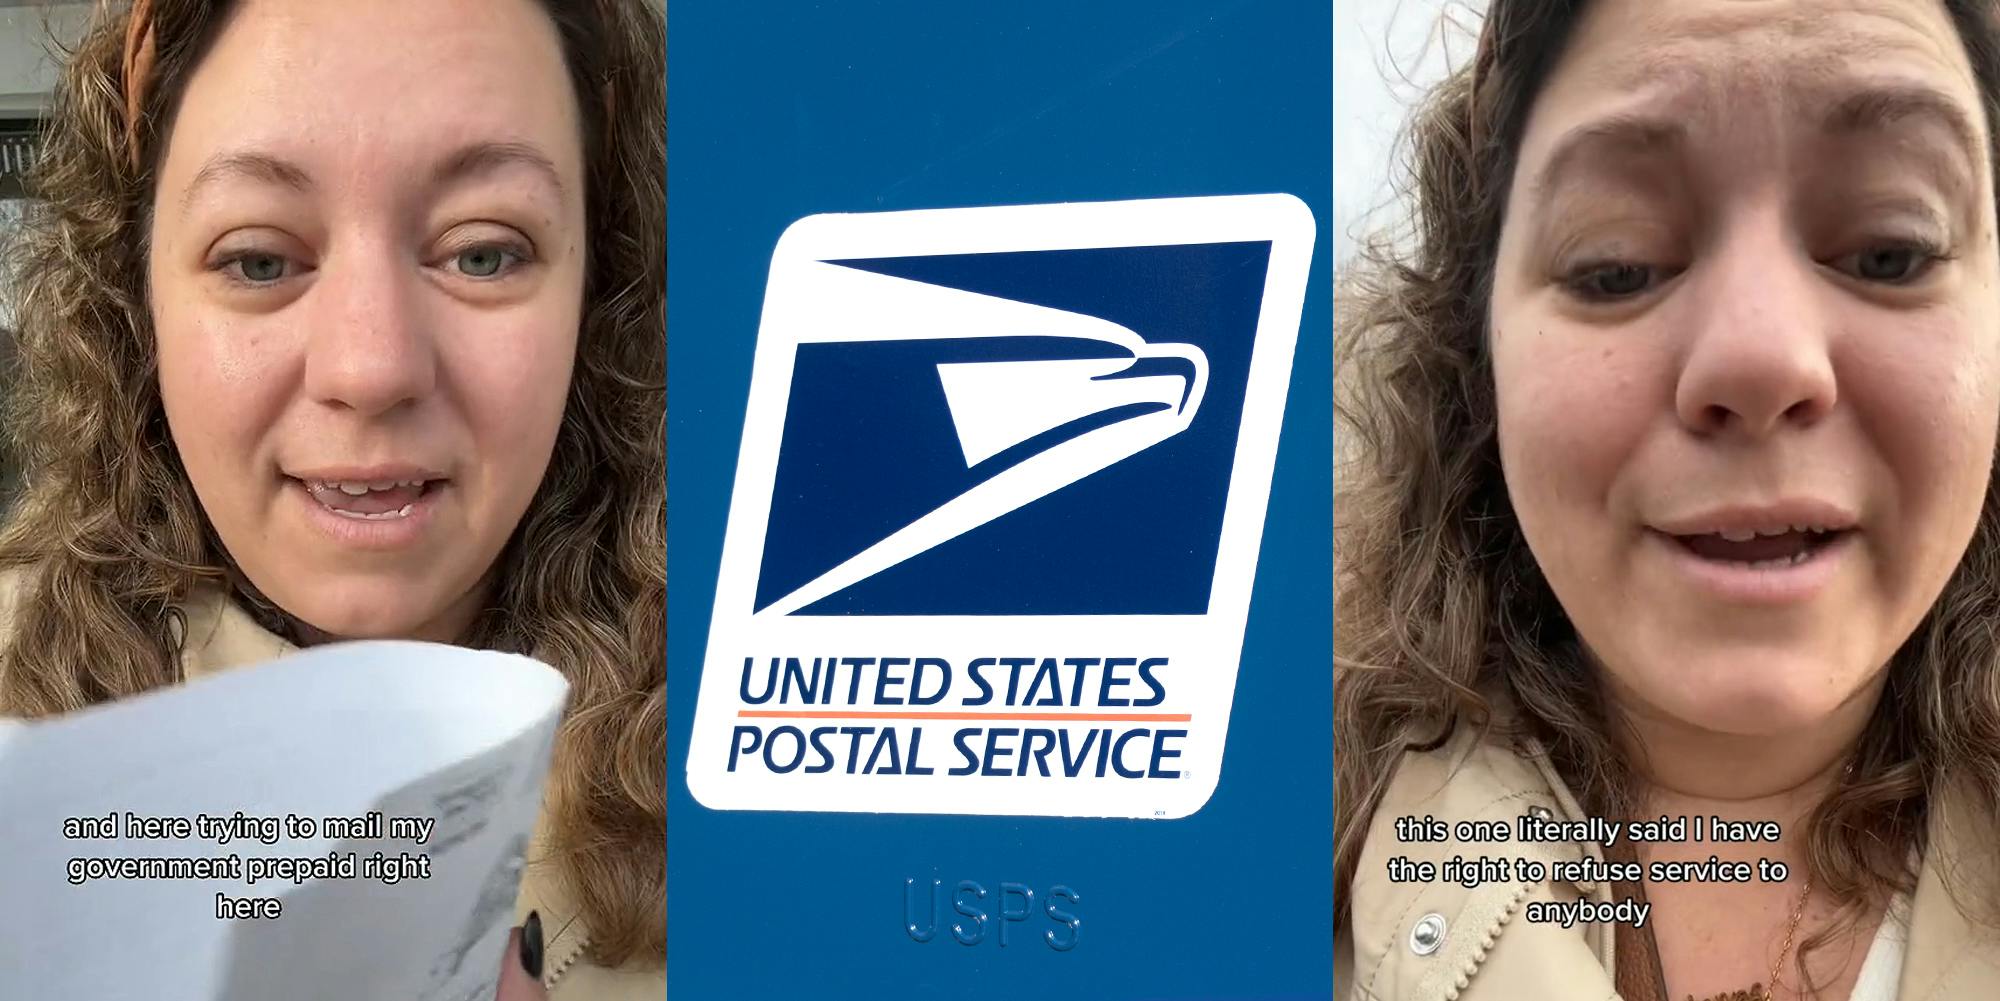 woman speaking outside of USPS holding paper caption "and here trying to mail my government prepaid right here" (l) USPS logo on blue background (c) woman speaking outside caption "this one literally said I have the right to refuse service" (r)